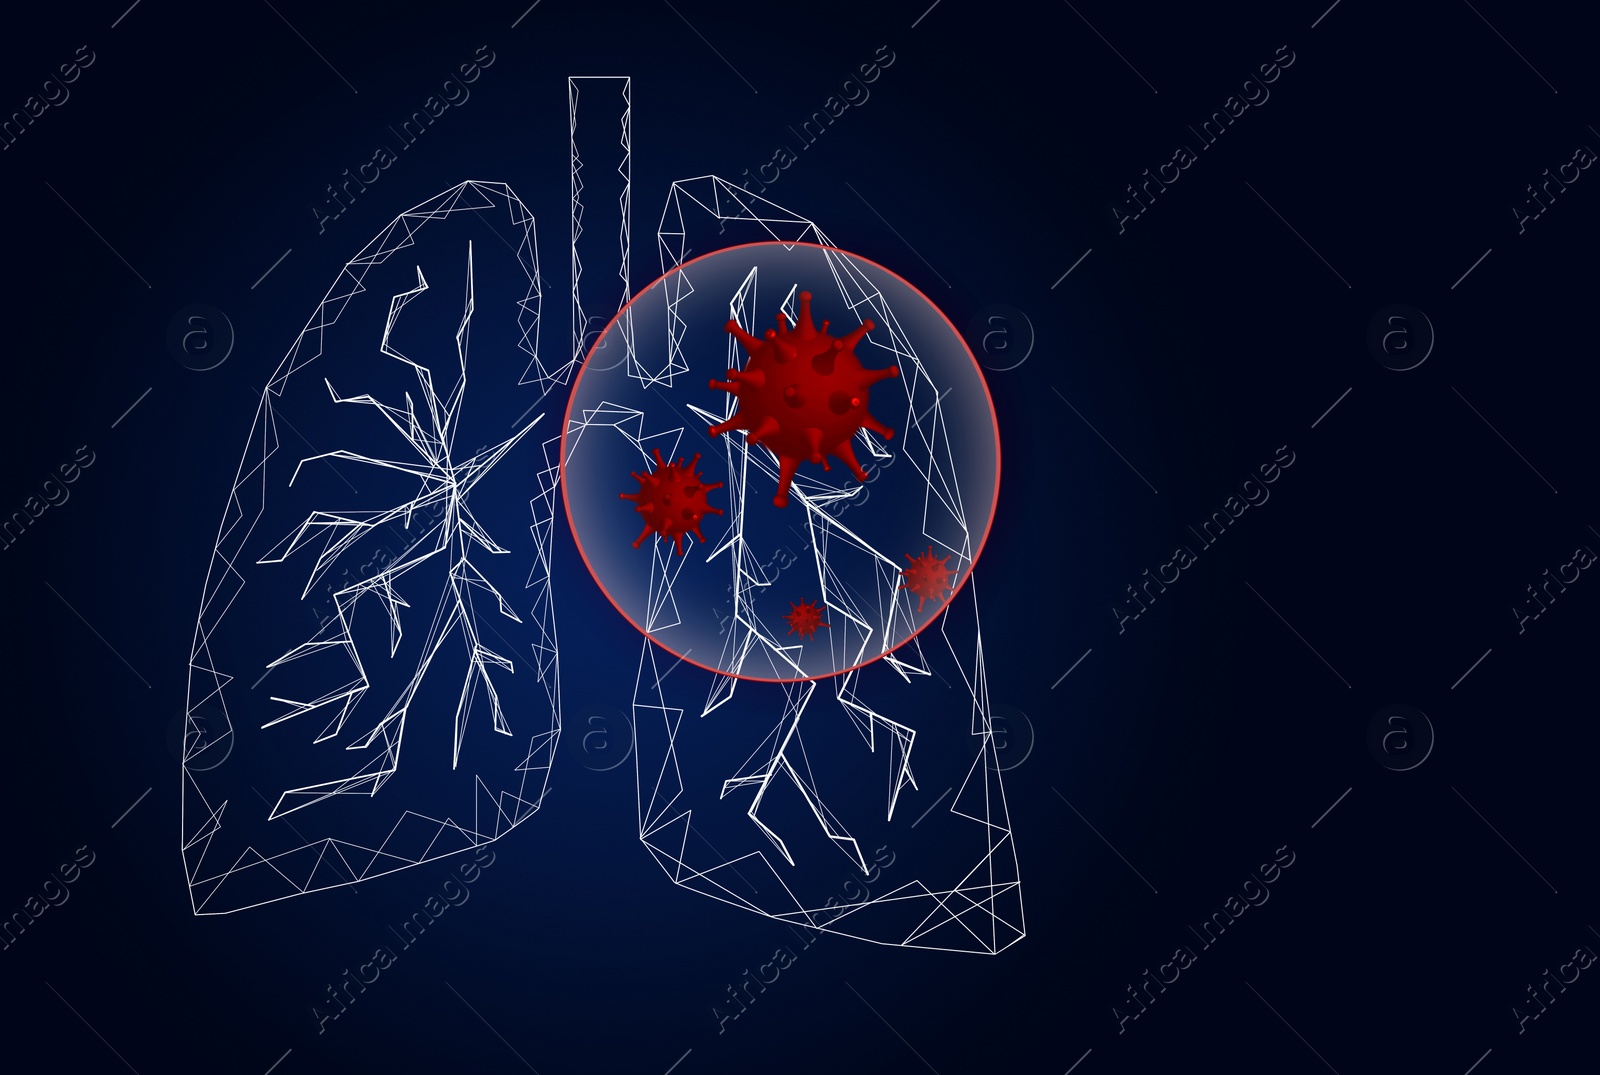 Illustration of  human lungs affected with disease on dark background